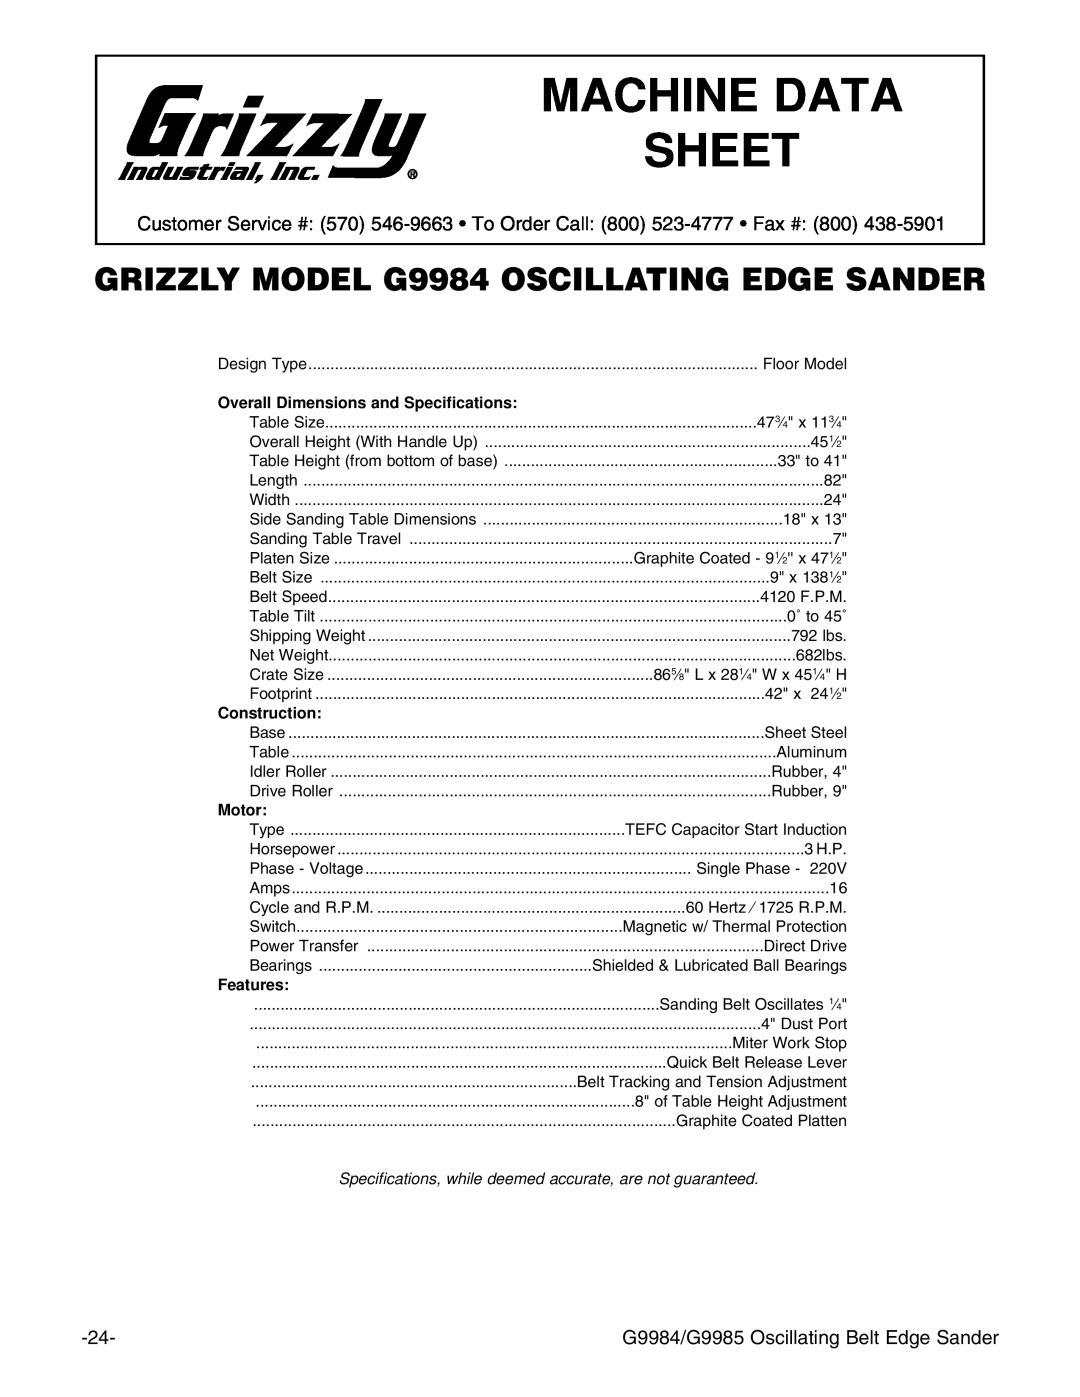 Grizzly Machine Data Sheet, GRIZZLY MODEL G9984 OSCILLATING EDGE SANDER, Overall Dimensions and Specifications, Motor 